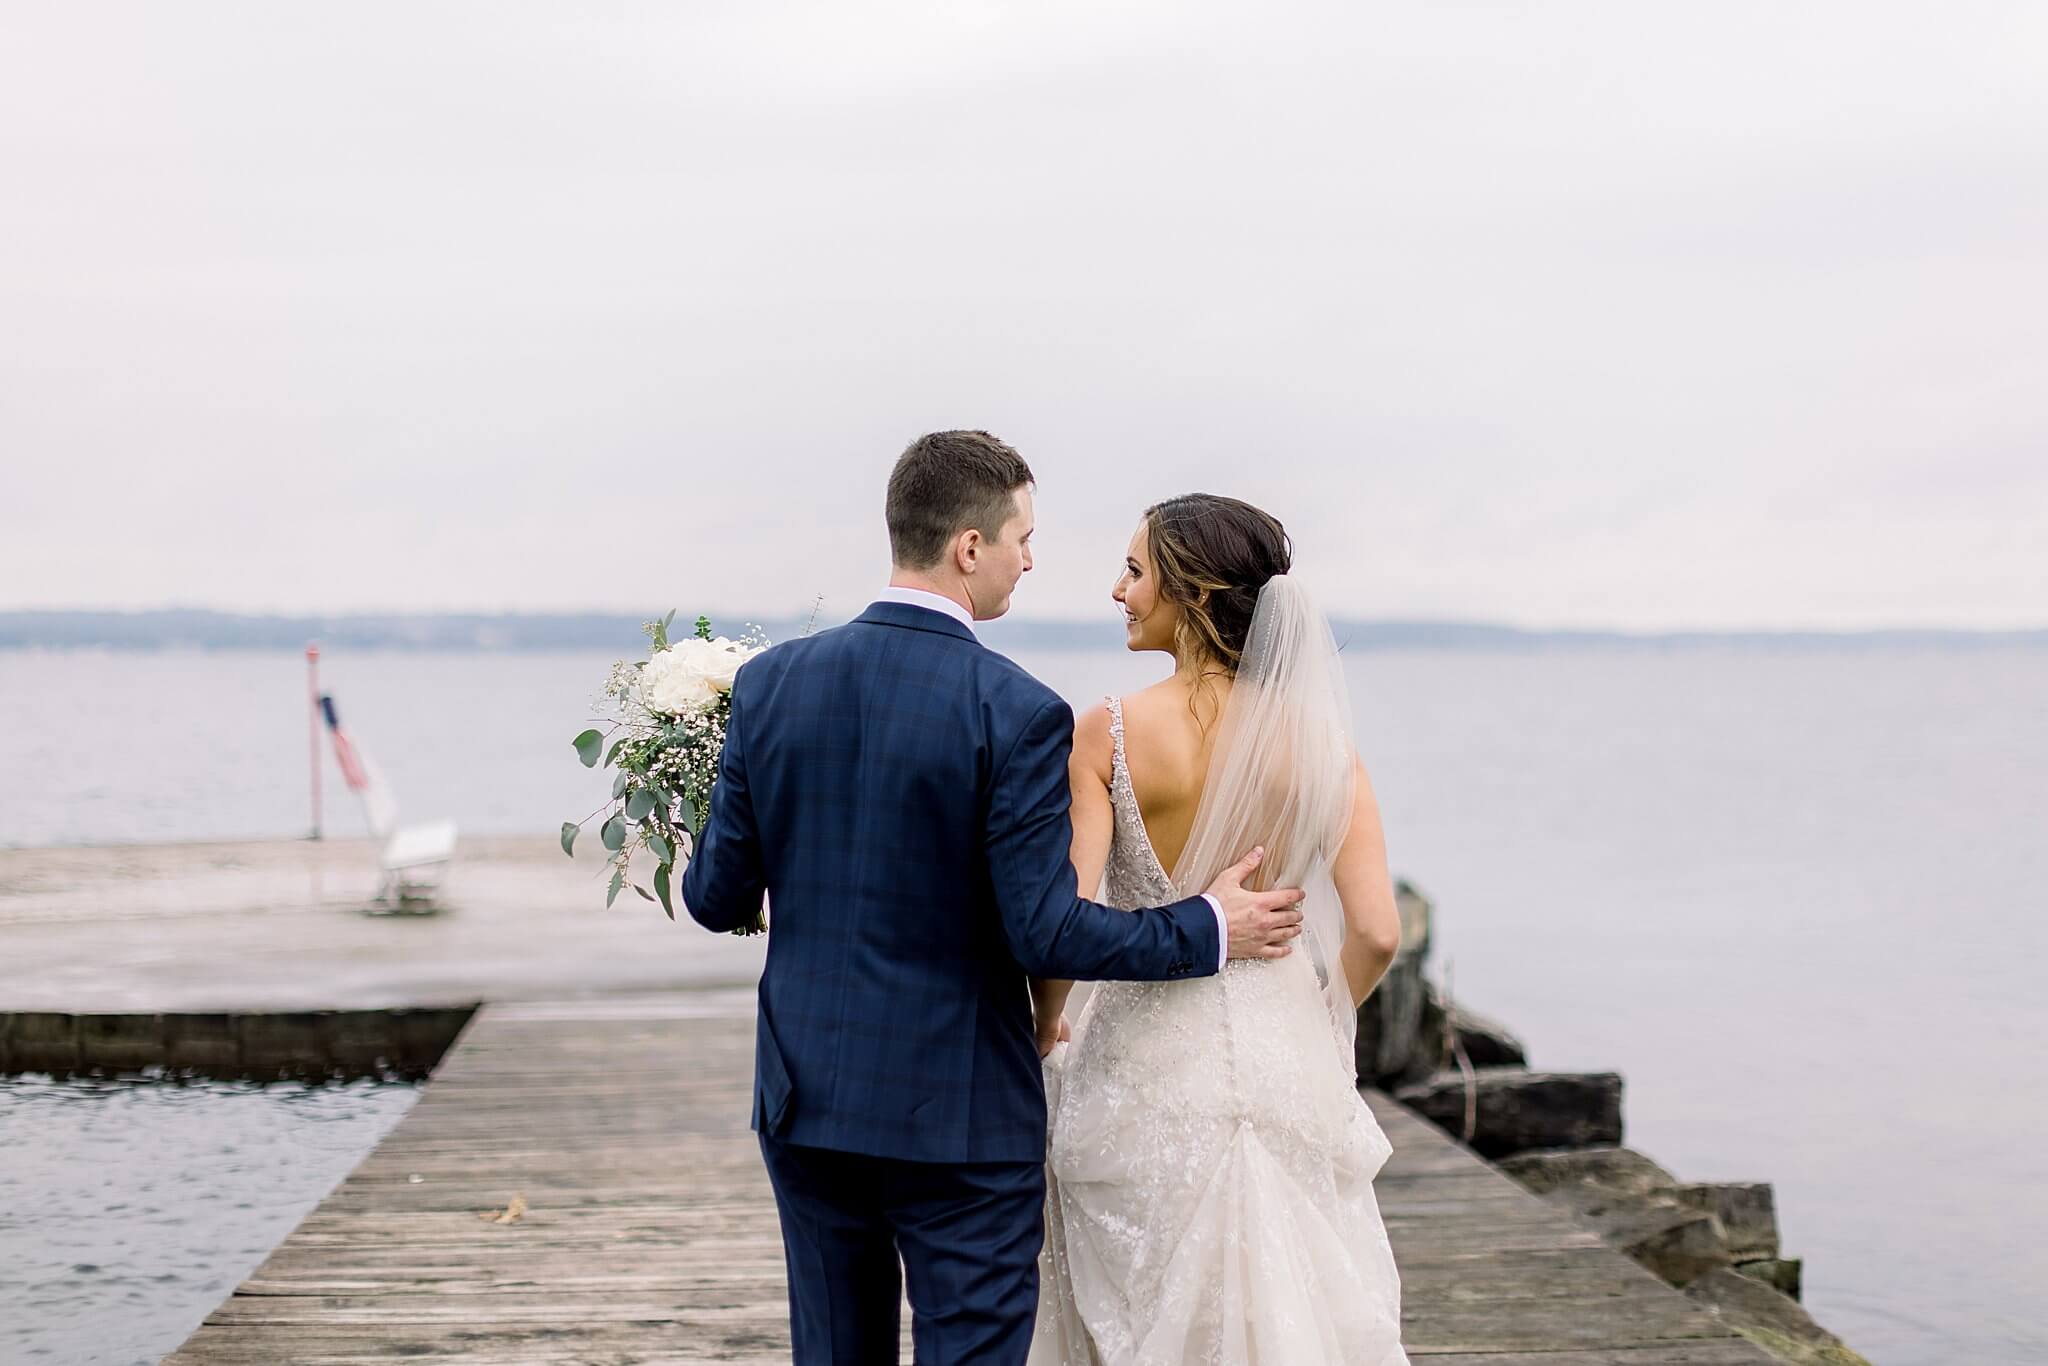 Bride and groom walk along pier on overcast day during Intimate Northern Michigan Wedding.